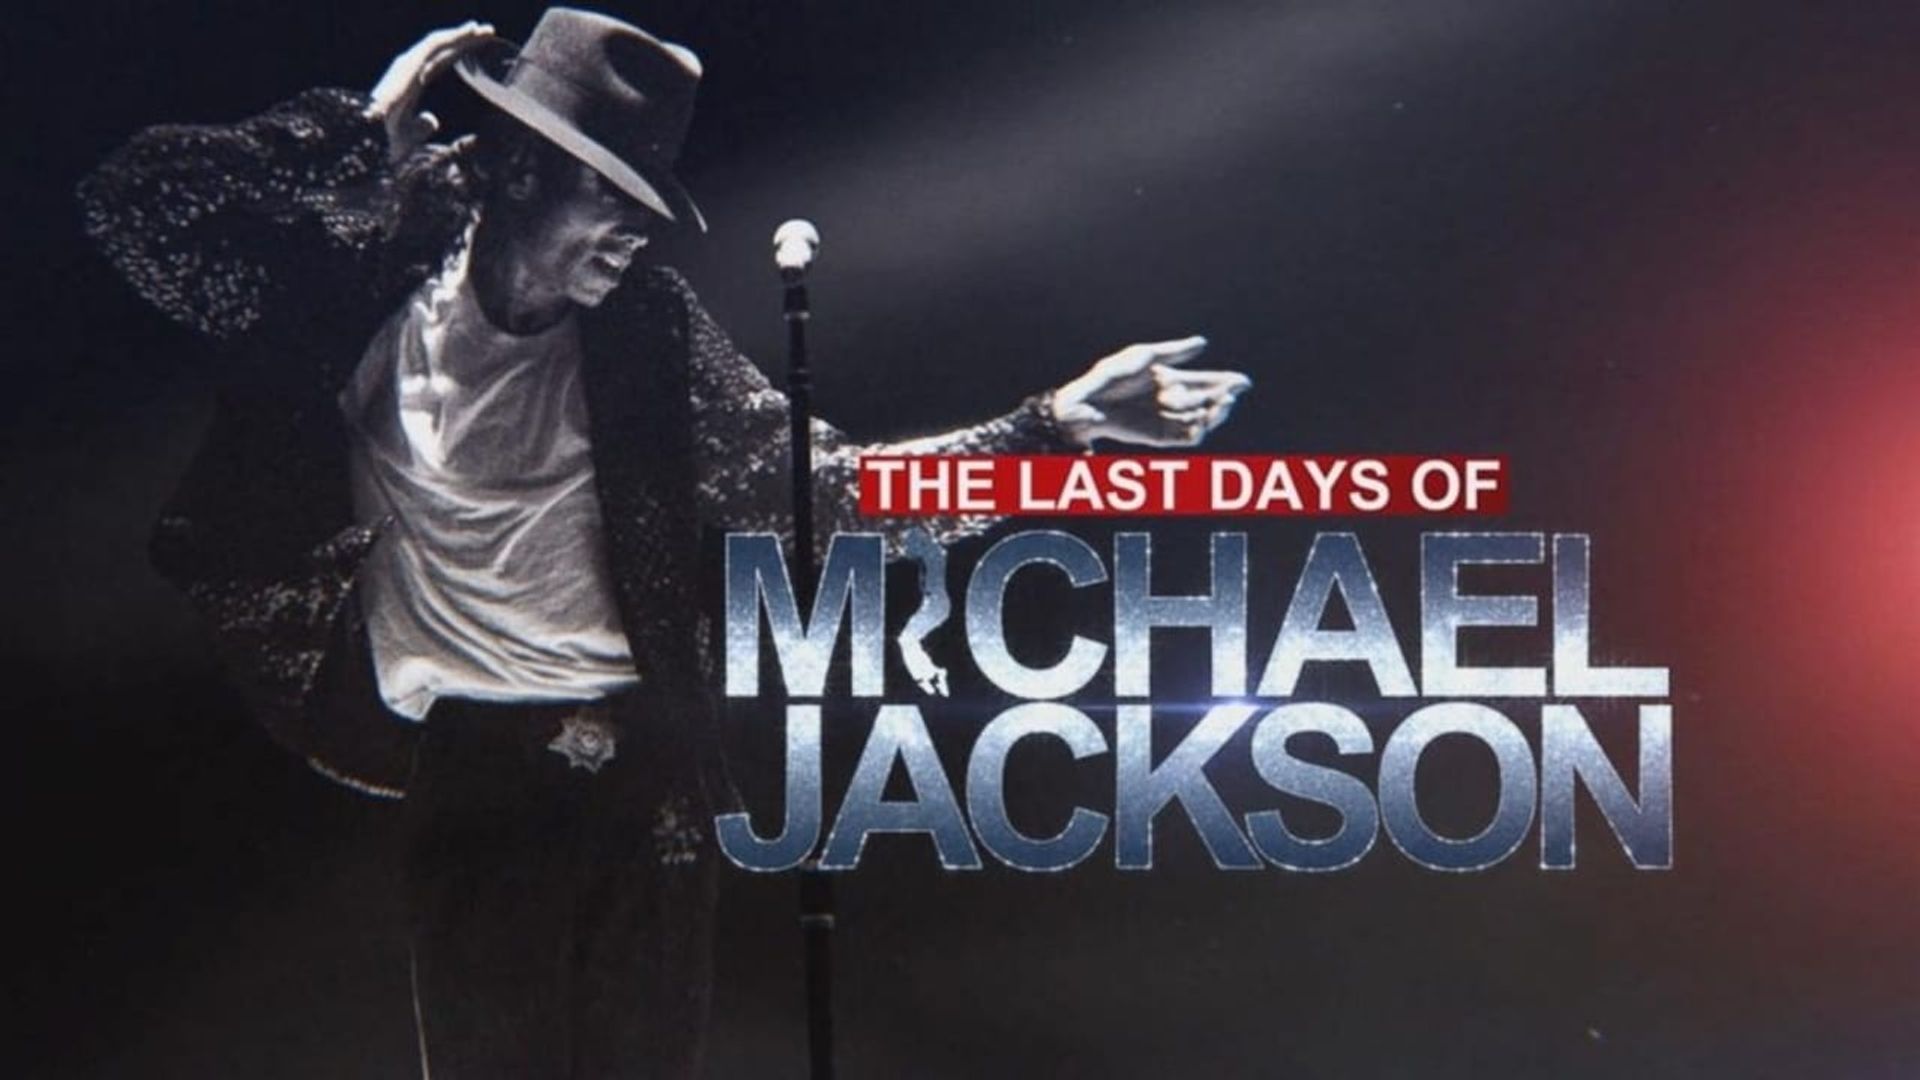 The Last Days of Michael Jackson background